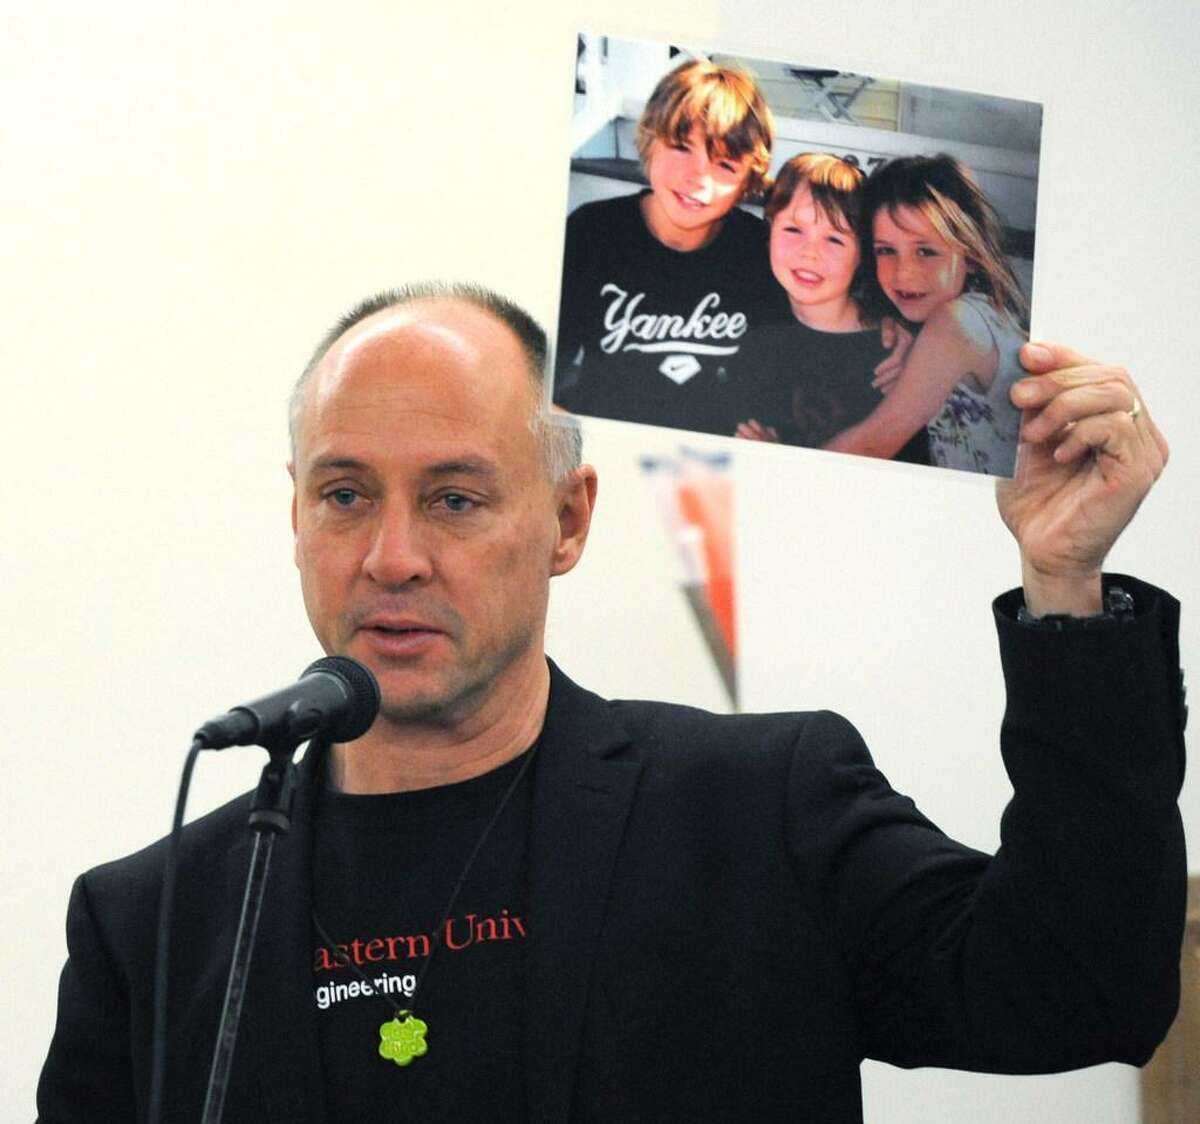 Sandy Hook Promise founder Mark Barden, who lost his son Daniel at Sandy Hook, holds up a photo of his children as the Wilton Quaker Meeting of the Religious Society of Friends hosts a Remembrance Vigil for All Victims of Gun Violence Saturday, December 8, 2018, at their facility in Wilton, Conn. The event was associated with the 6th Annual National Vigil being held in Washington, D.C. Wednesday.